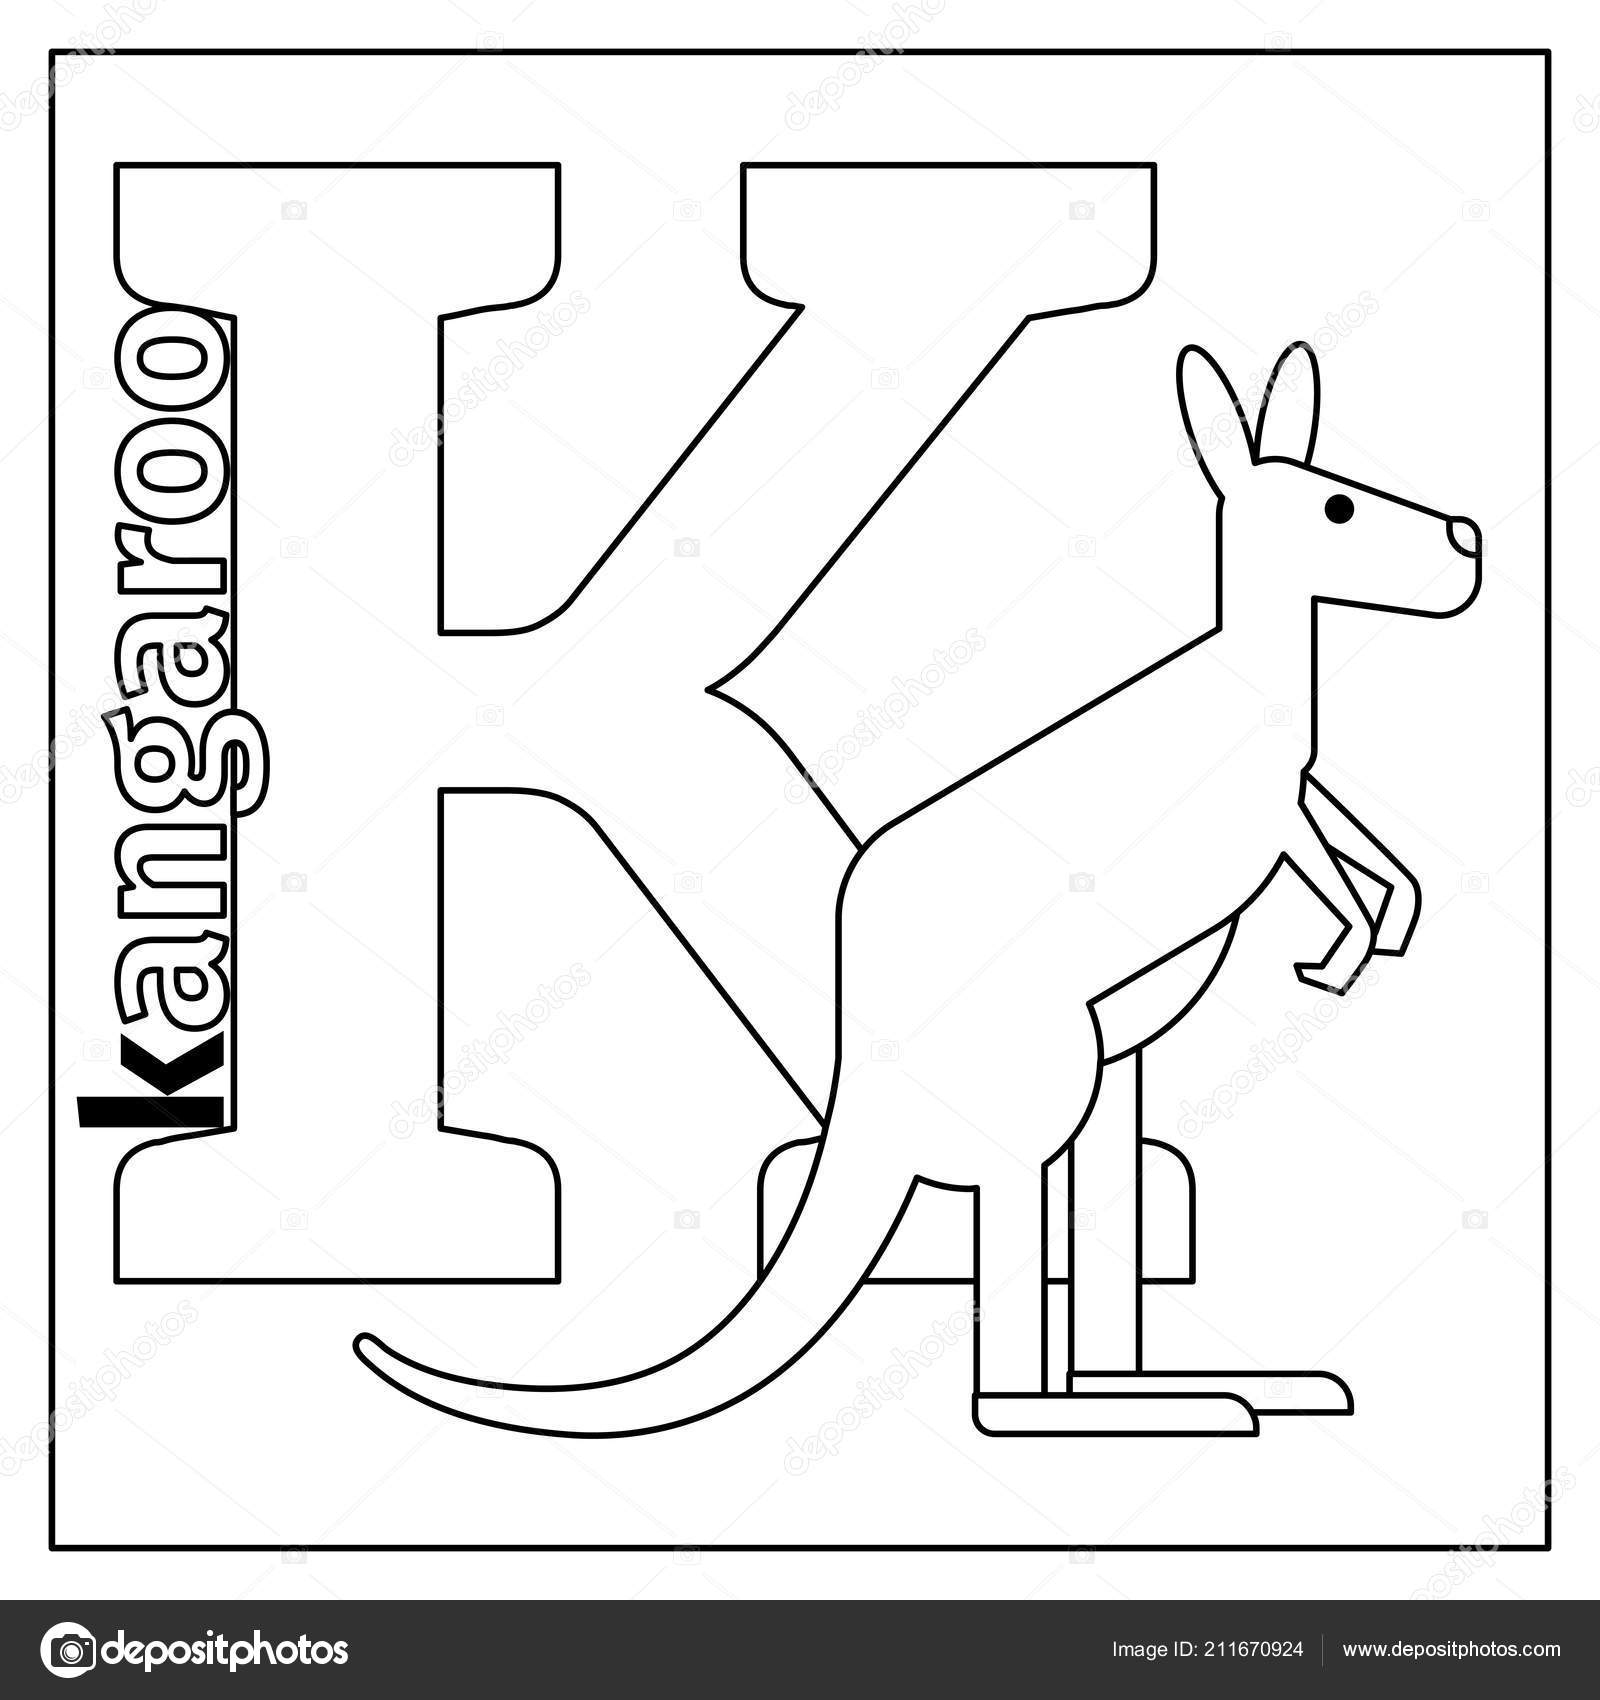 Kangaroo Picture To Color Kangaroo Letter K Coloring Page